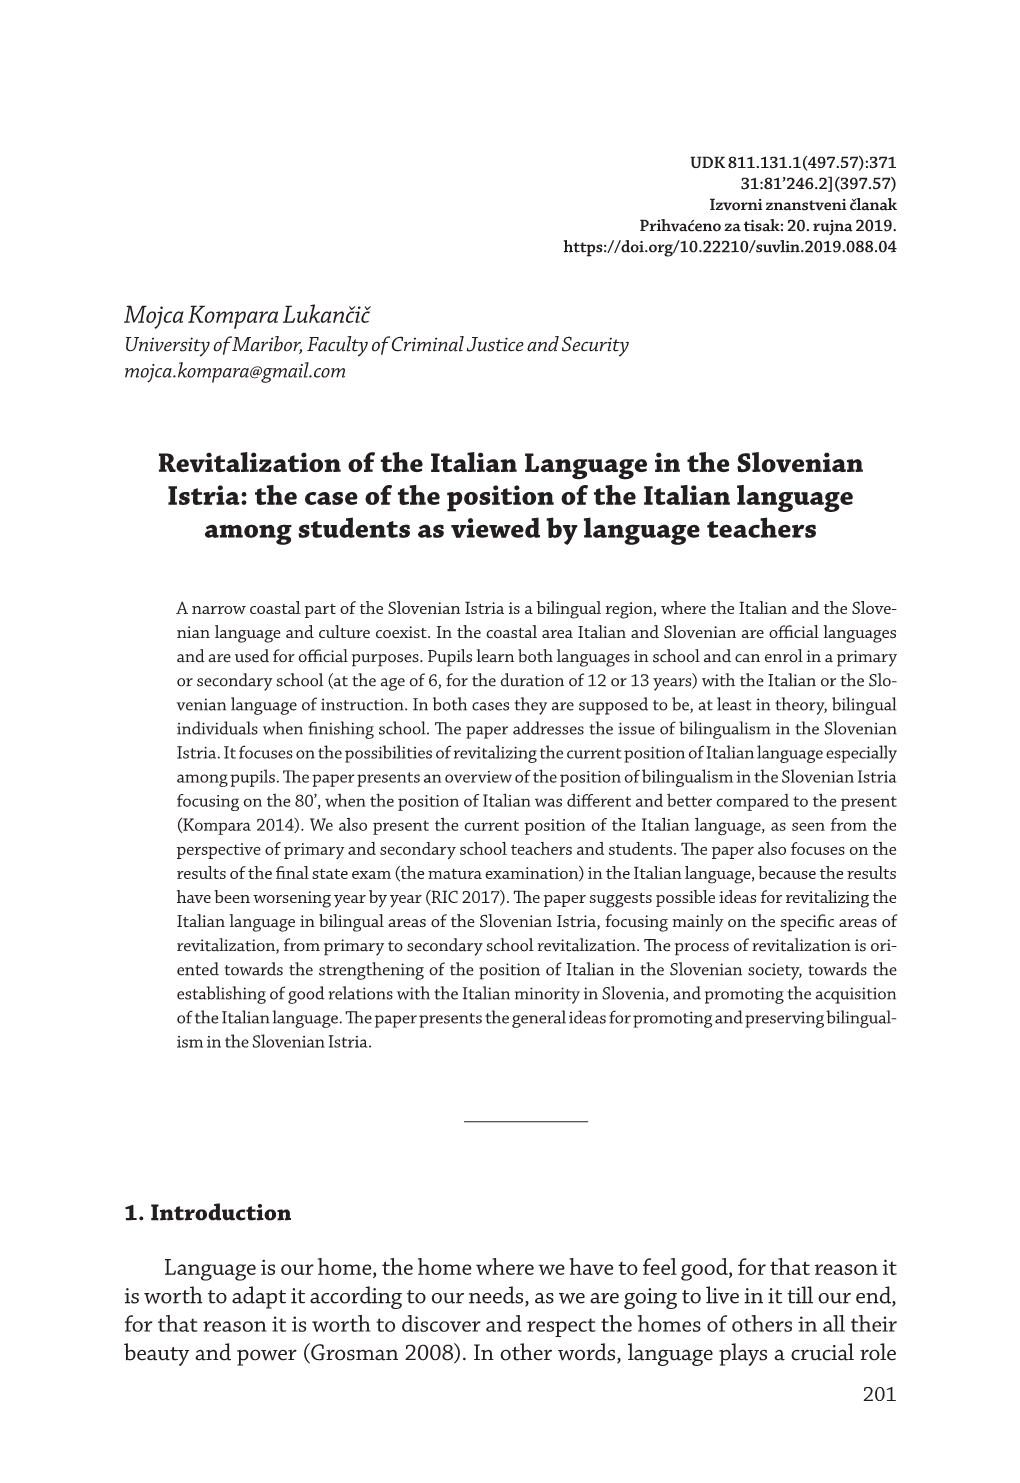 Revitalization of the Italian Language in the Slovenian Istria: the Case of the Position of the Italian Language Among Students As Viewed by Language Teachers